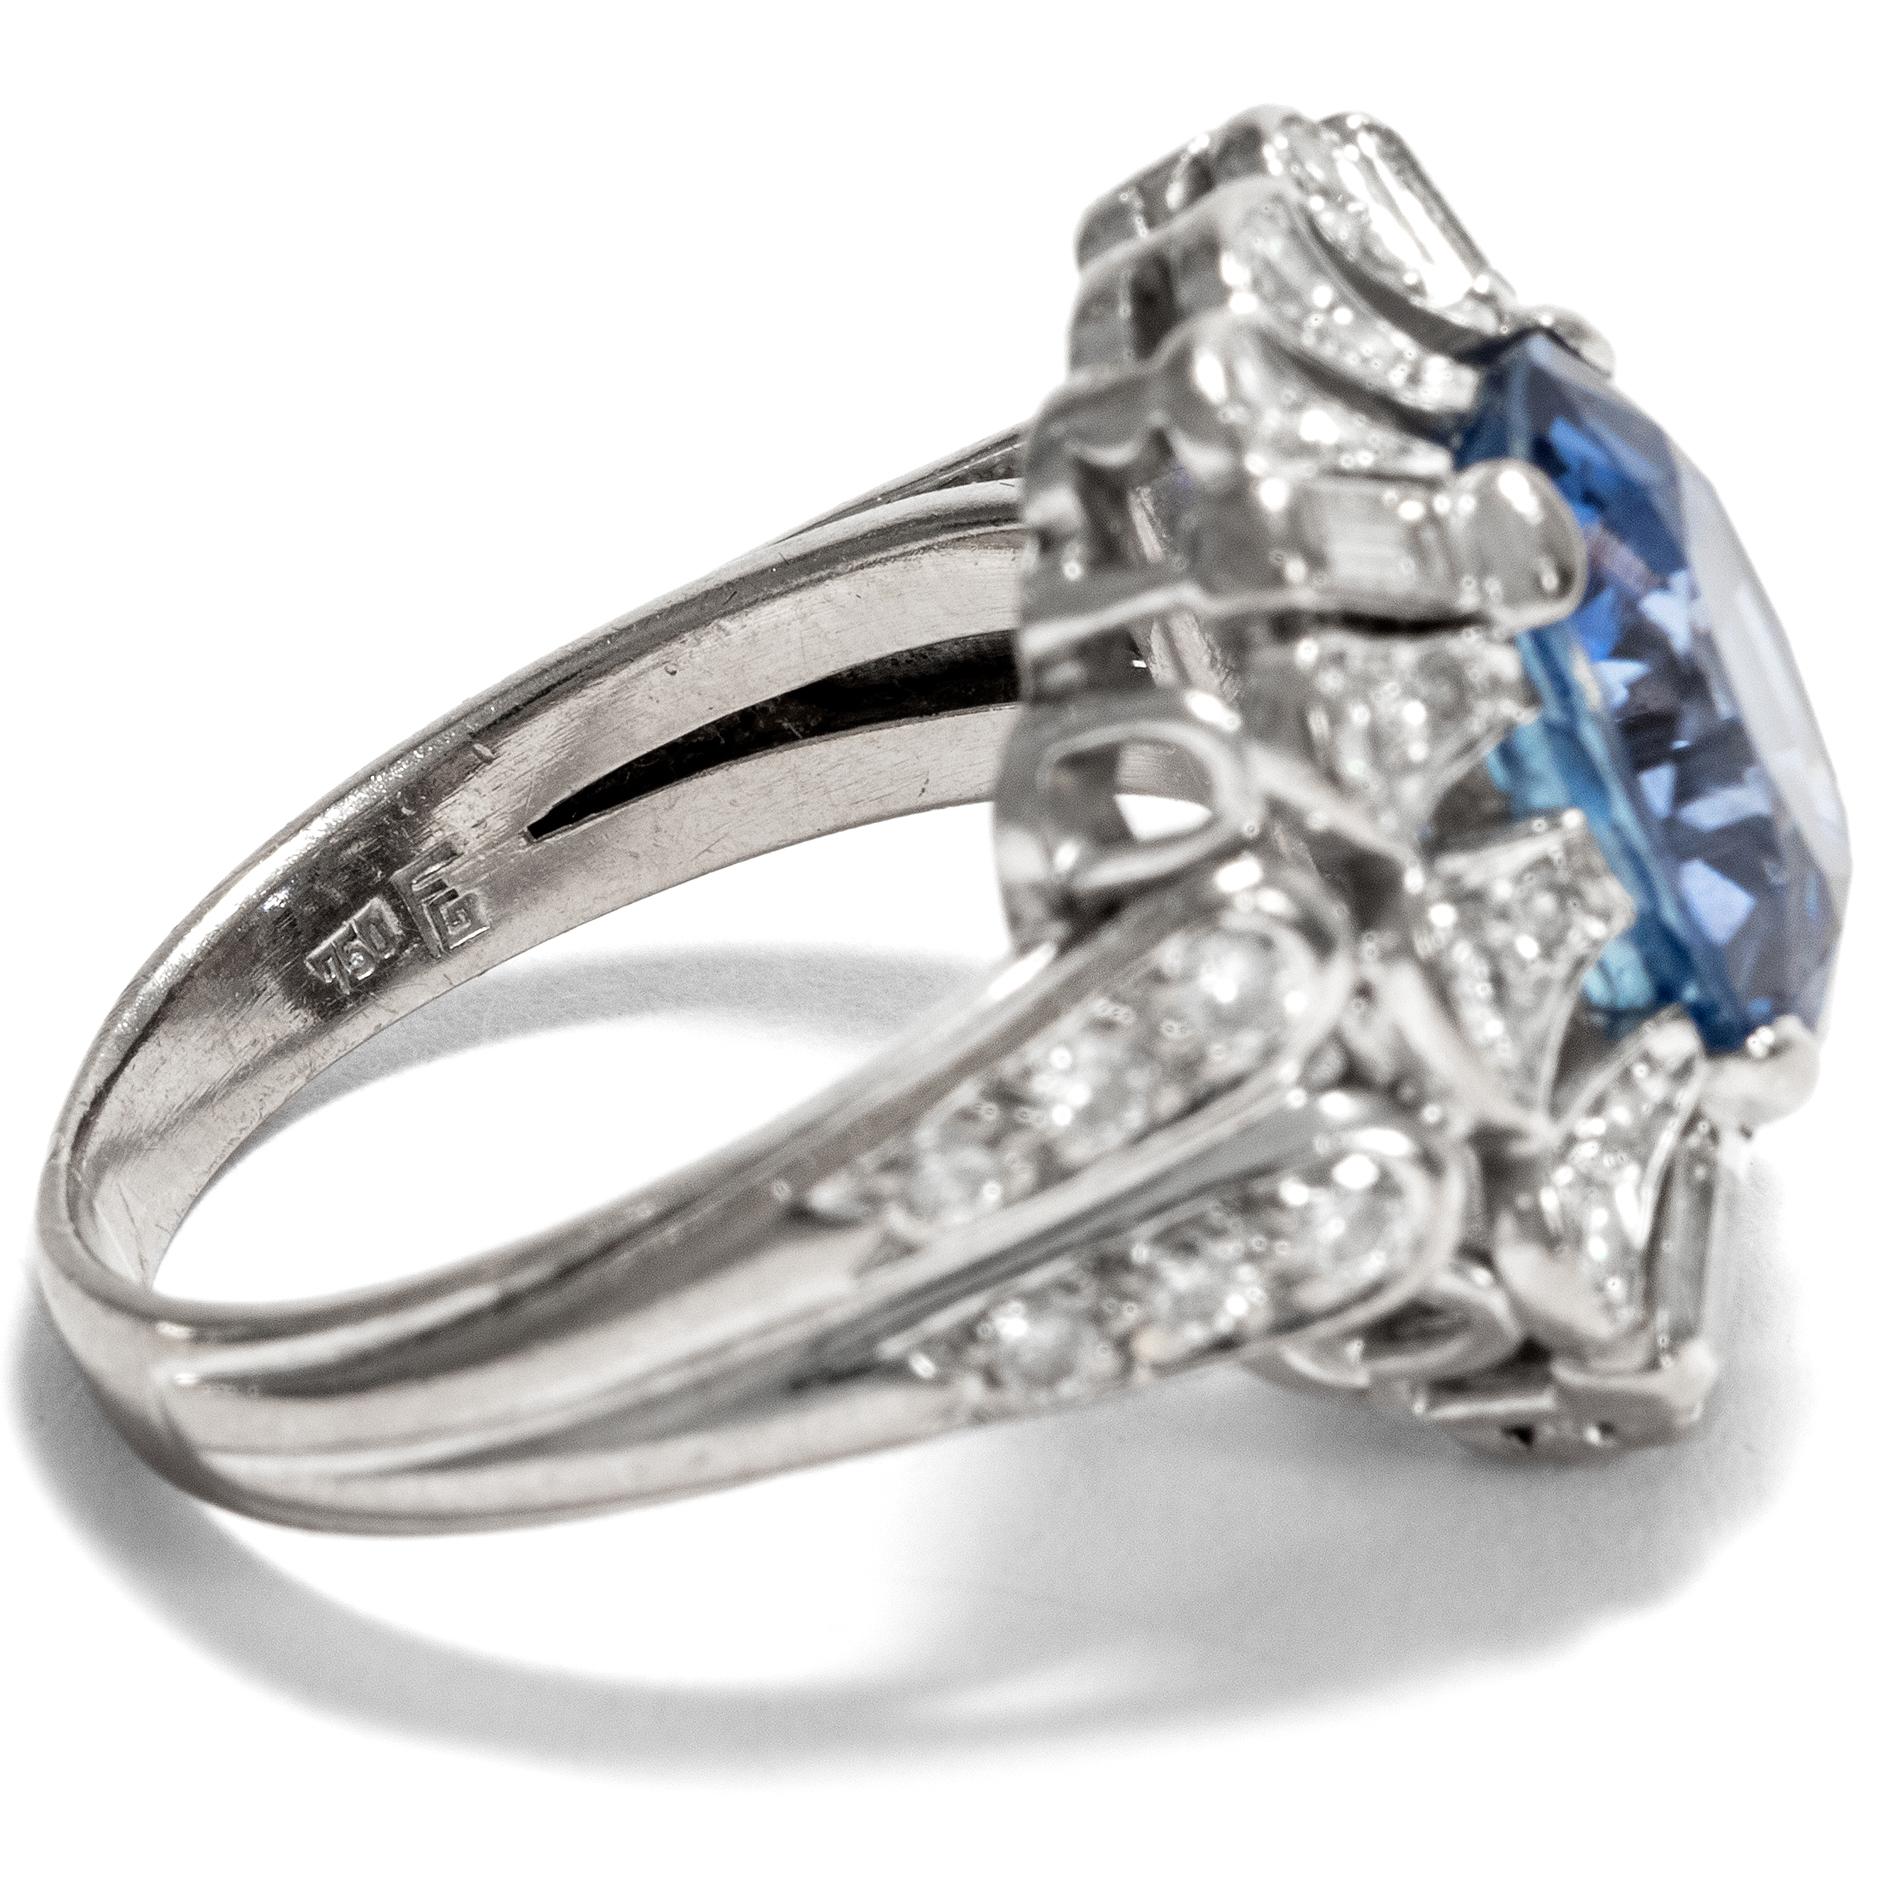 Women's or Men's Vintage circa 1970 5.8 Carat Blue Sapphire and Diamond Cocktail Cluster Ring